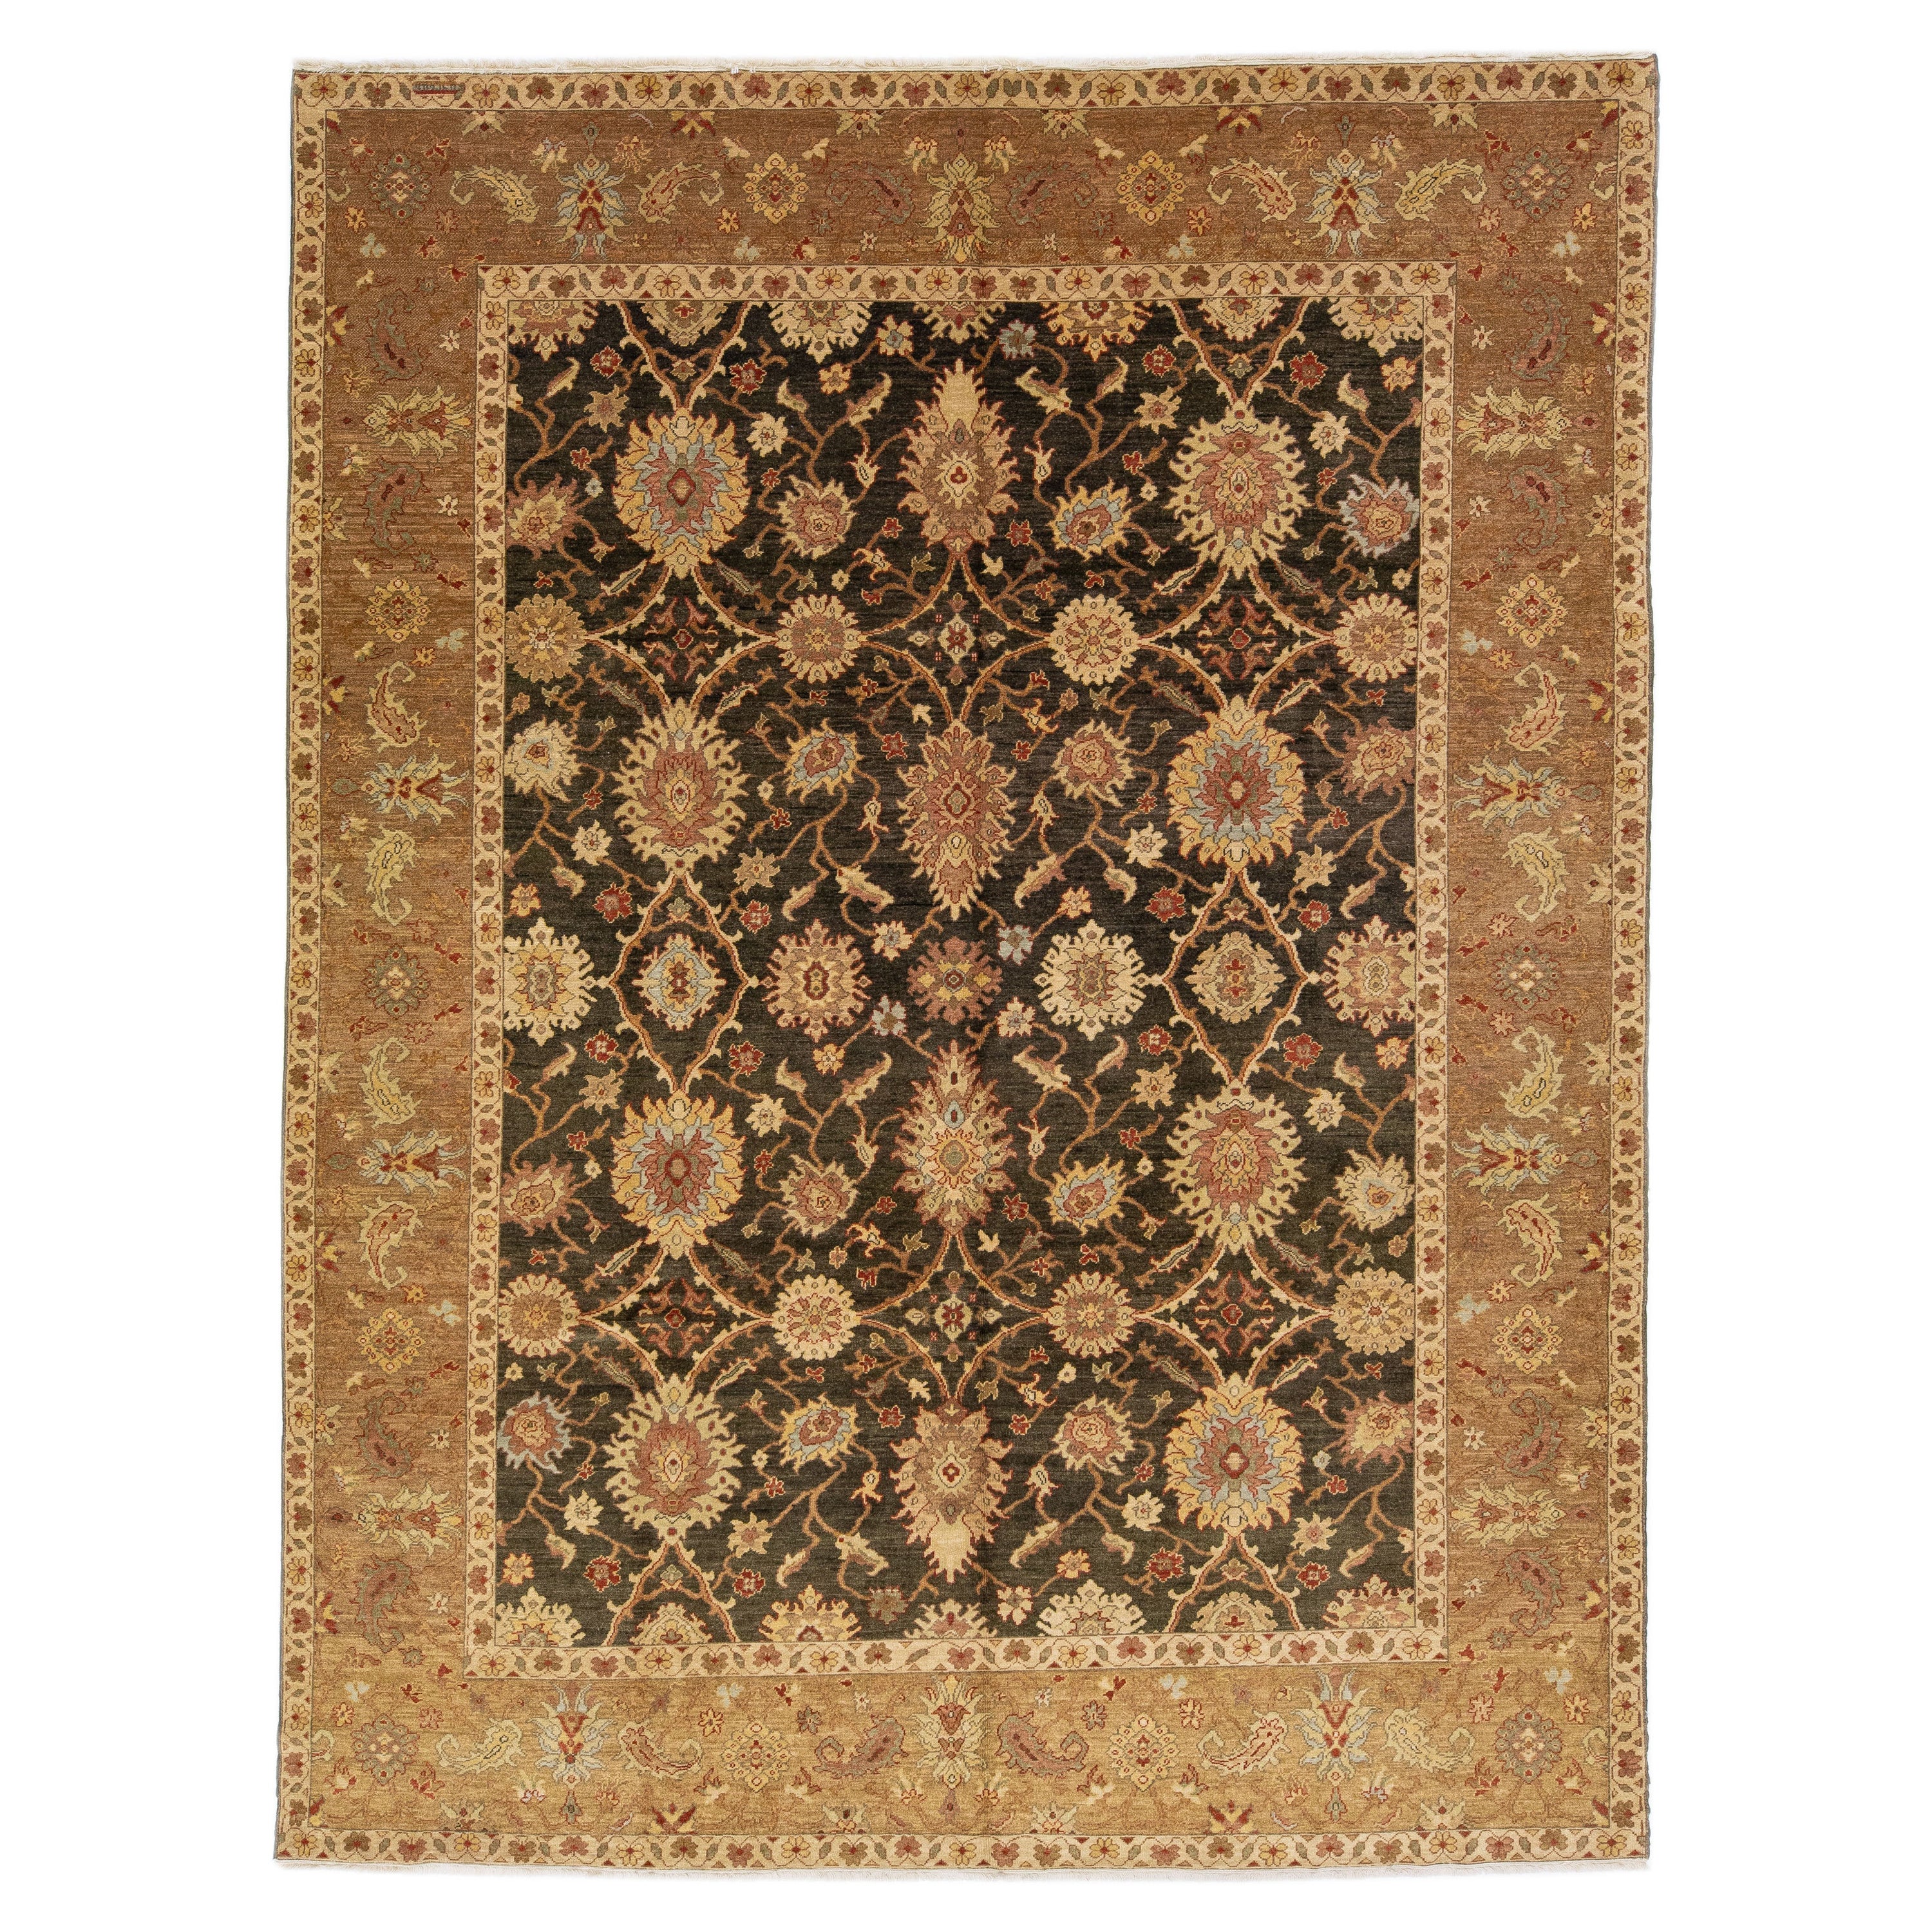 Contemporary Brown Peshawar Handmade Wool Rug with Floral Motif